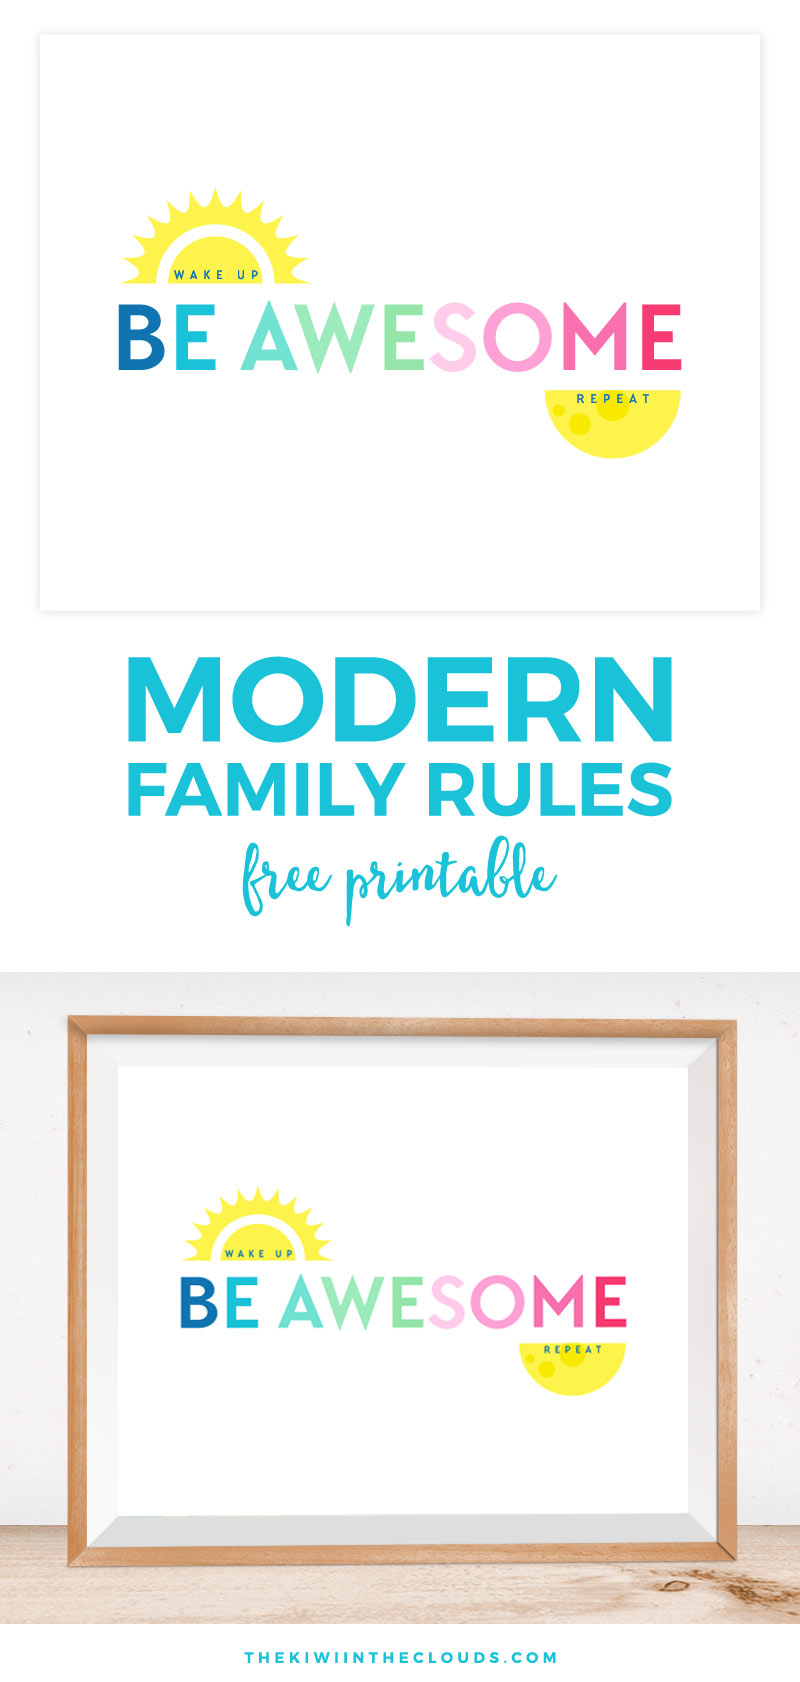 Download this cheery and succinct family rules printable to remind your family to just be awesome!